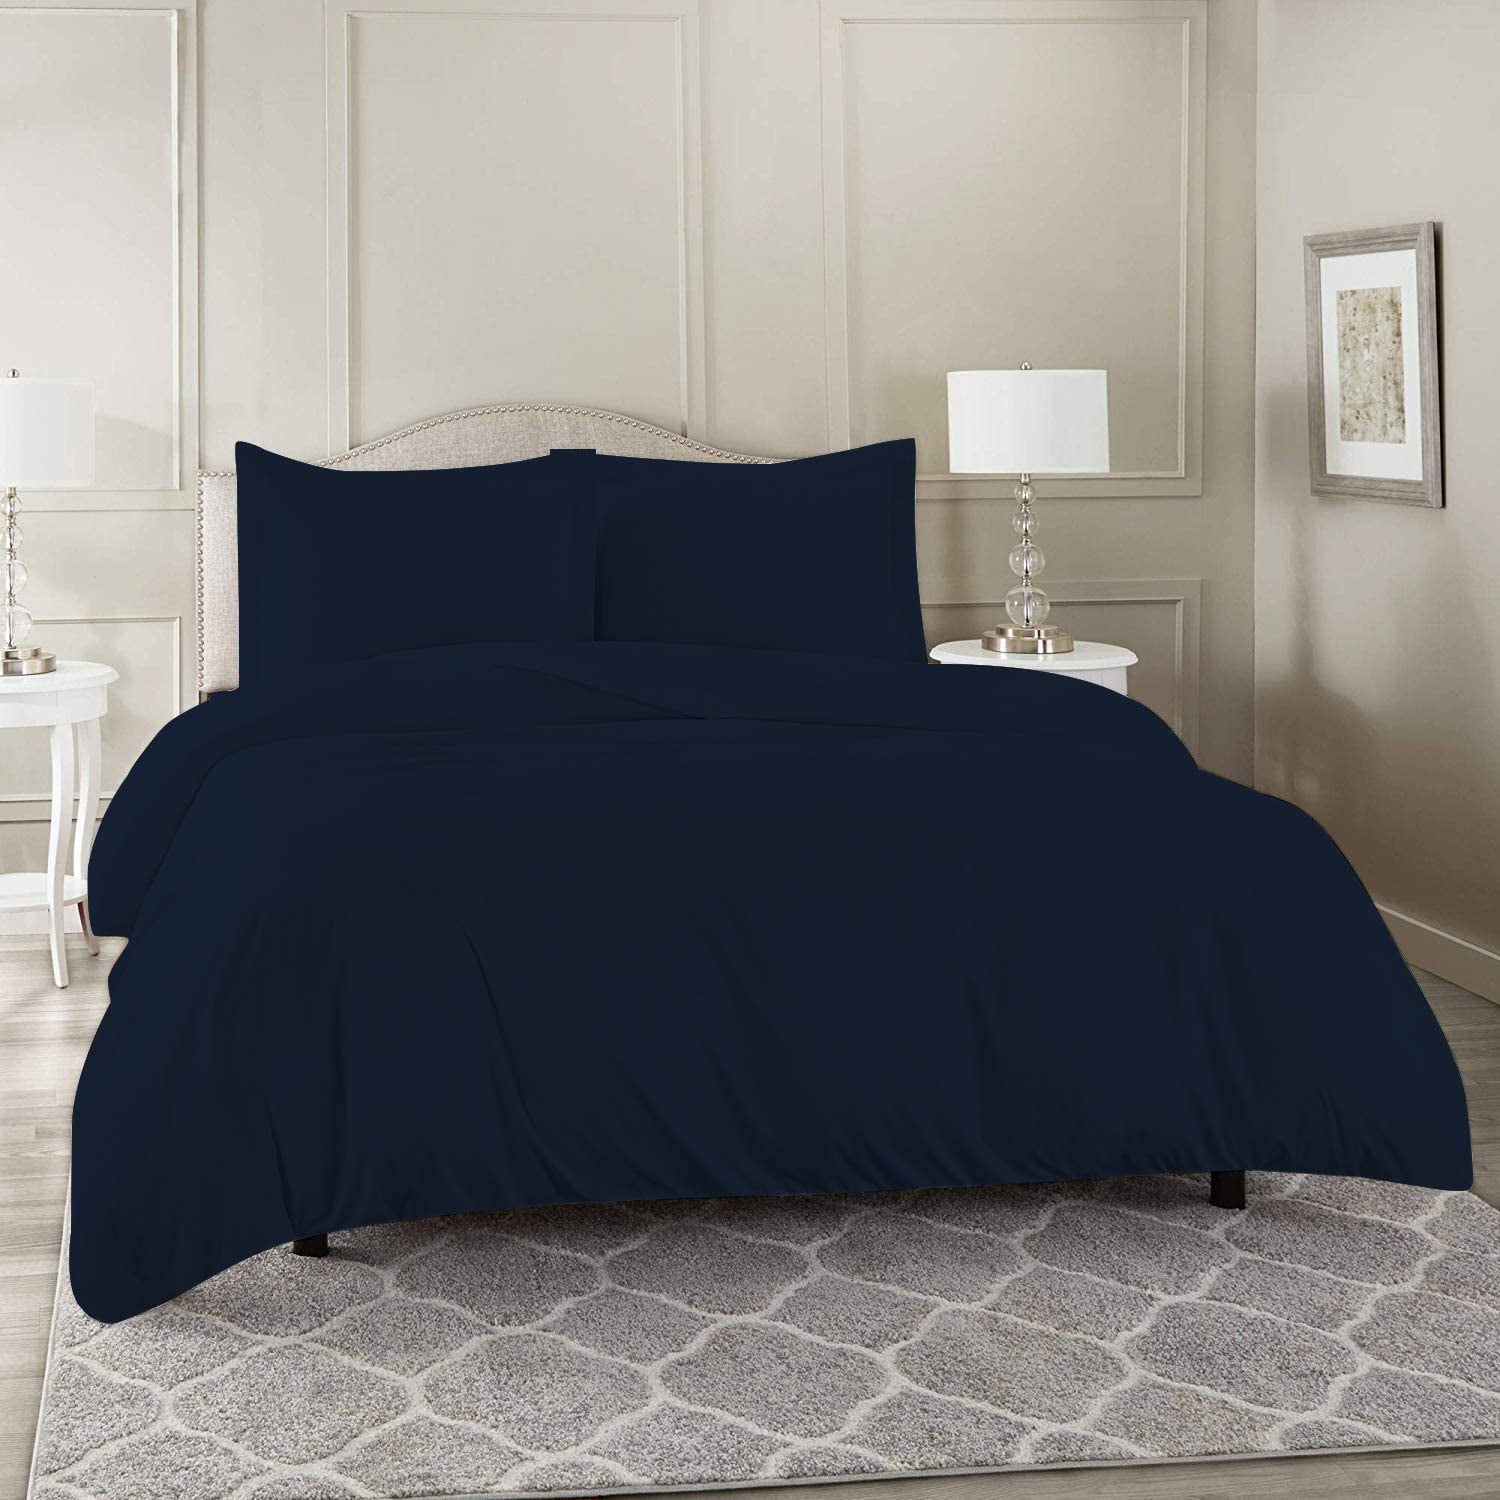 Navy Blue and White Cotton Duvet Cover Bedding Set with Shams ALL SIZES 